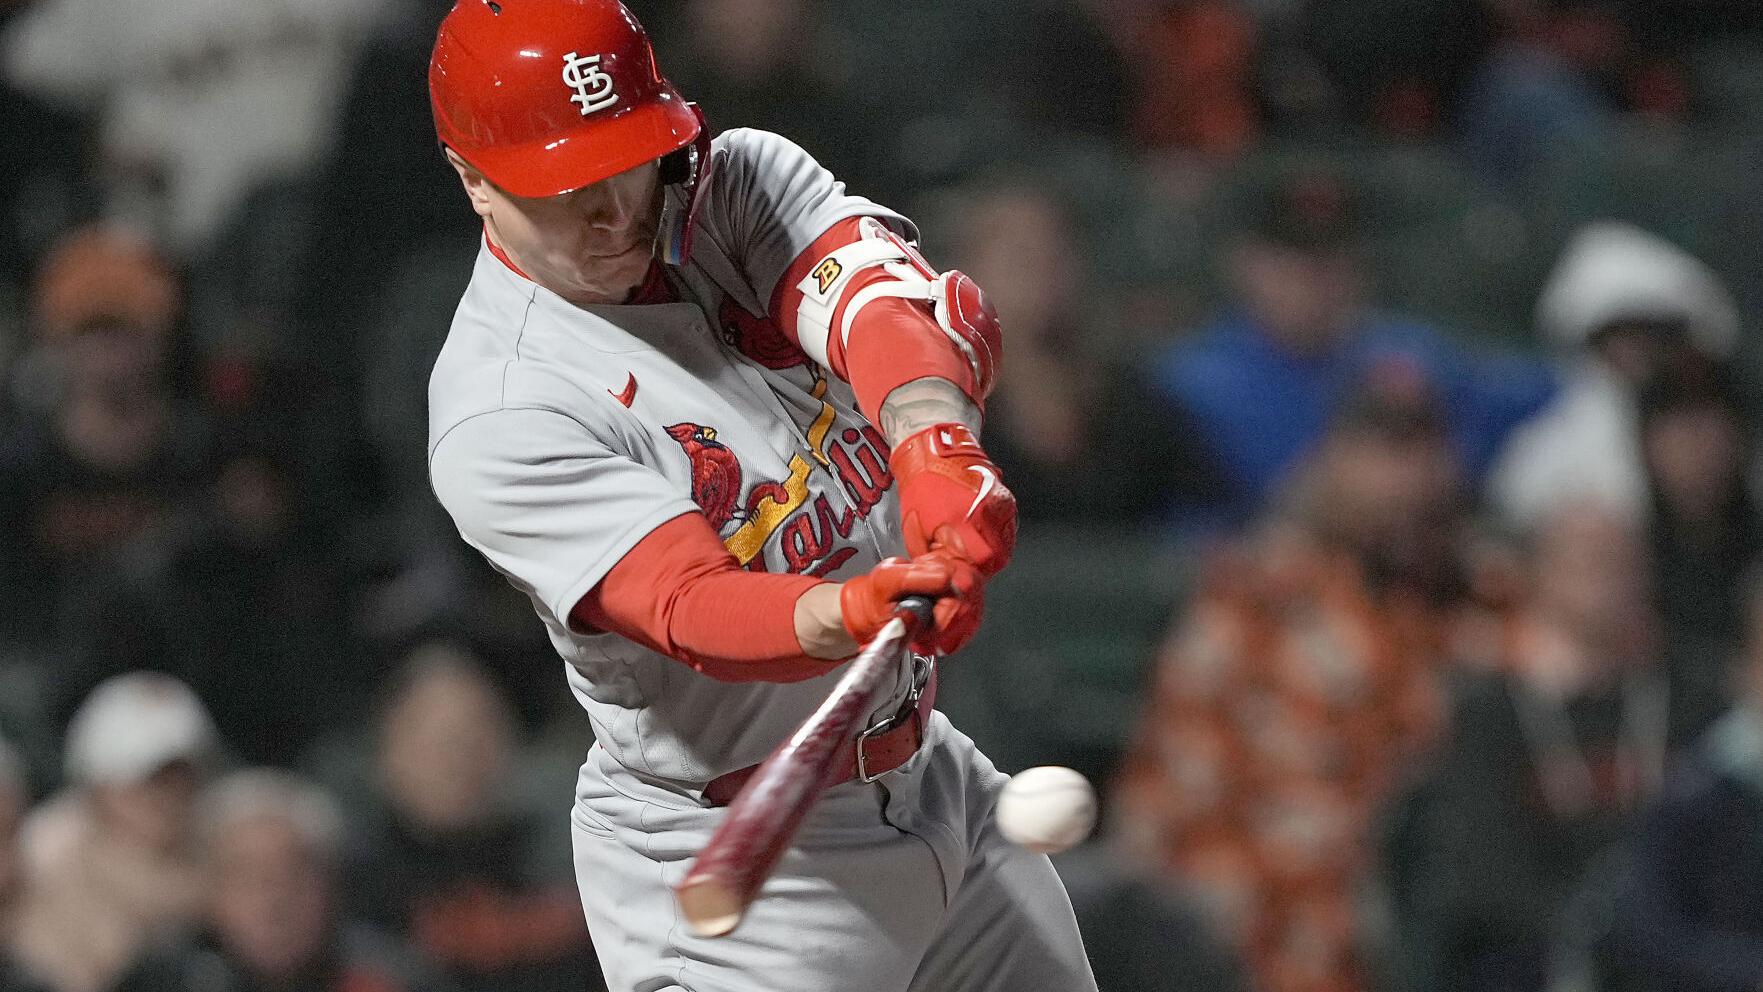 With a 'different look' in lineup, O'Neill's bat makes noise on eve of arbitration hearing with Cardinals